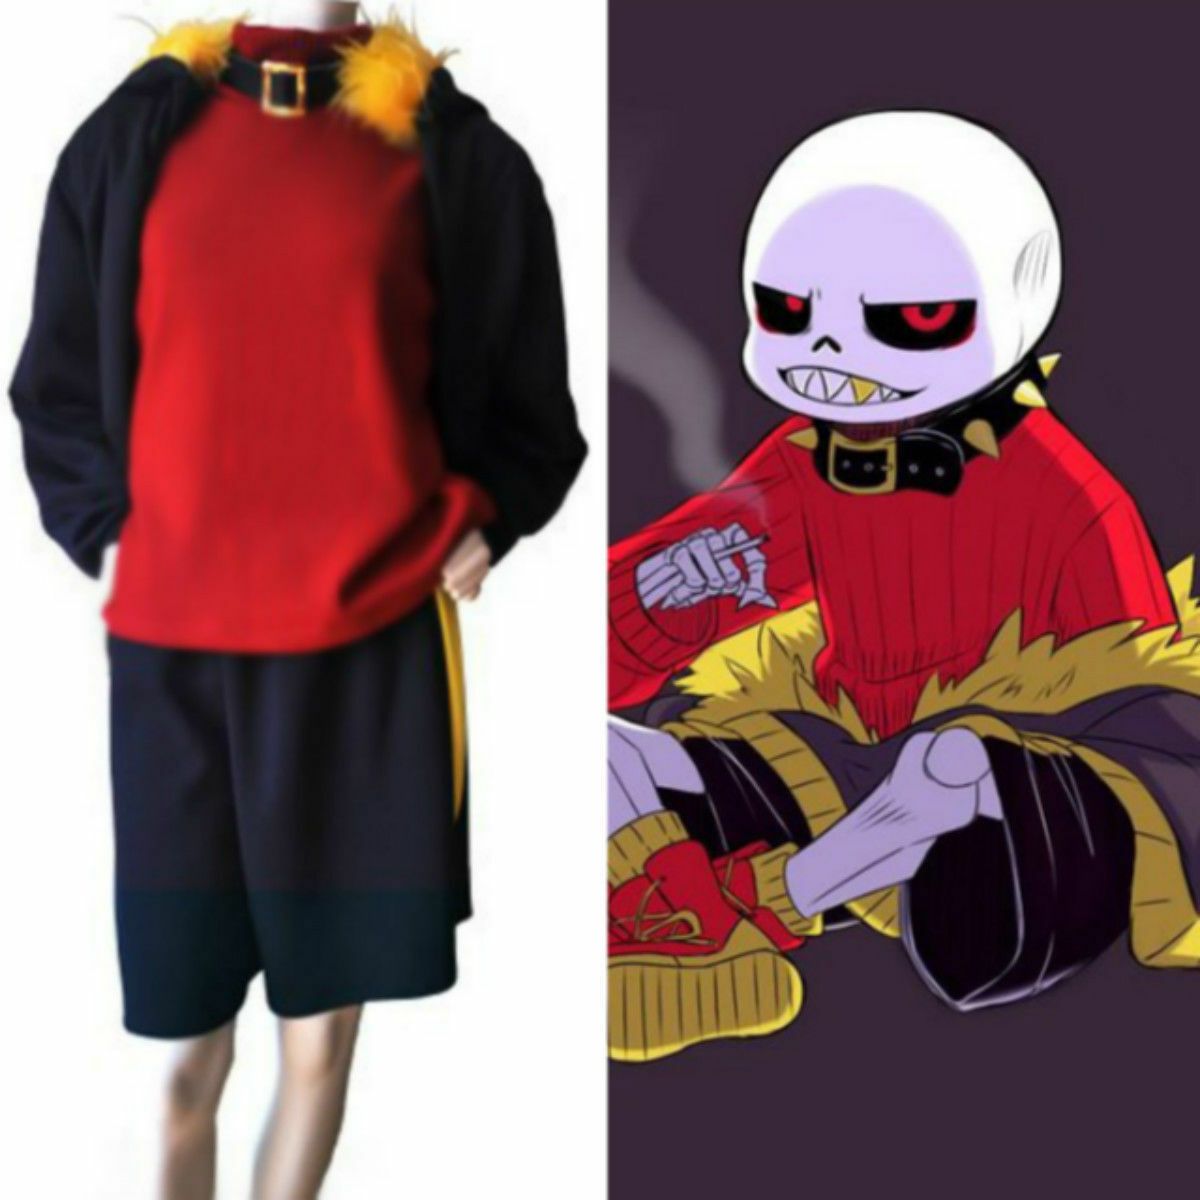 Undertale Underfell Sans Outfit Uniform Cosplay Costume Custom Made From Dream7 43 86 Dhgate Com